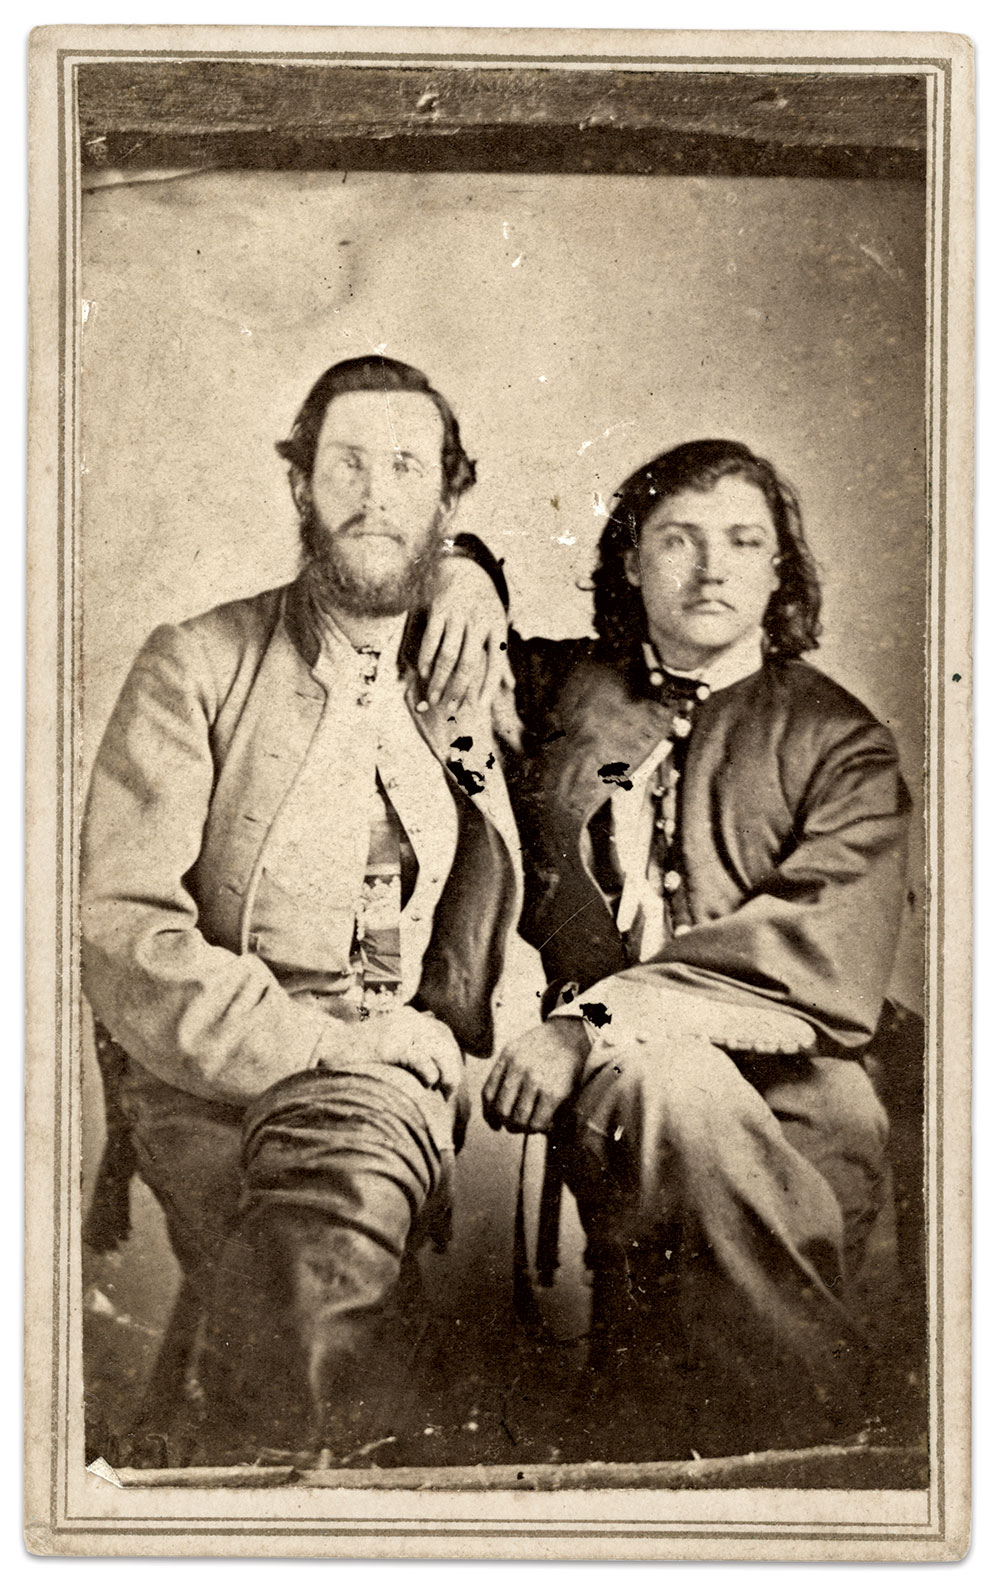 Berry, left, and Clark. Carte de visite copy of a sixth-plate tintype, circa 1866-1870, by Ward & Moore, location unidentified.